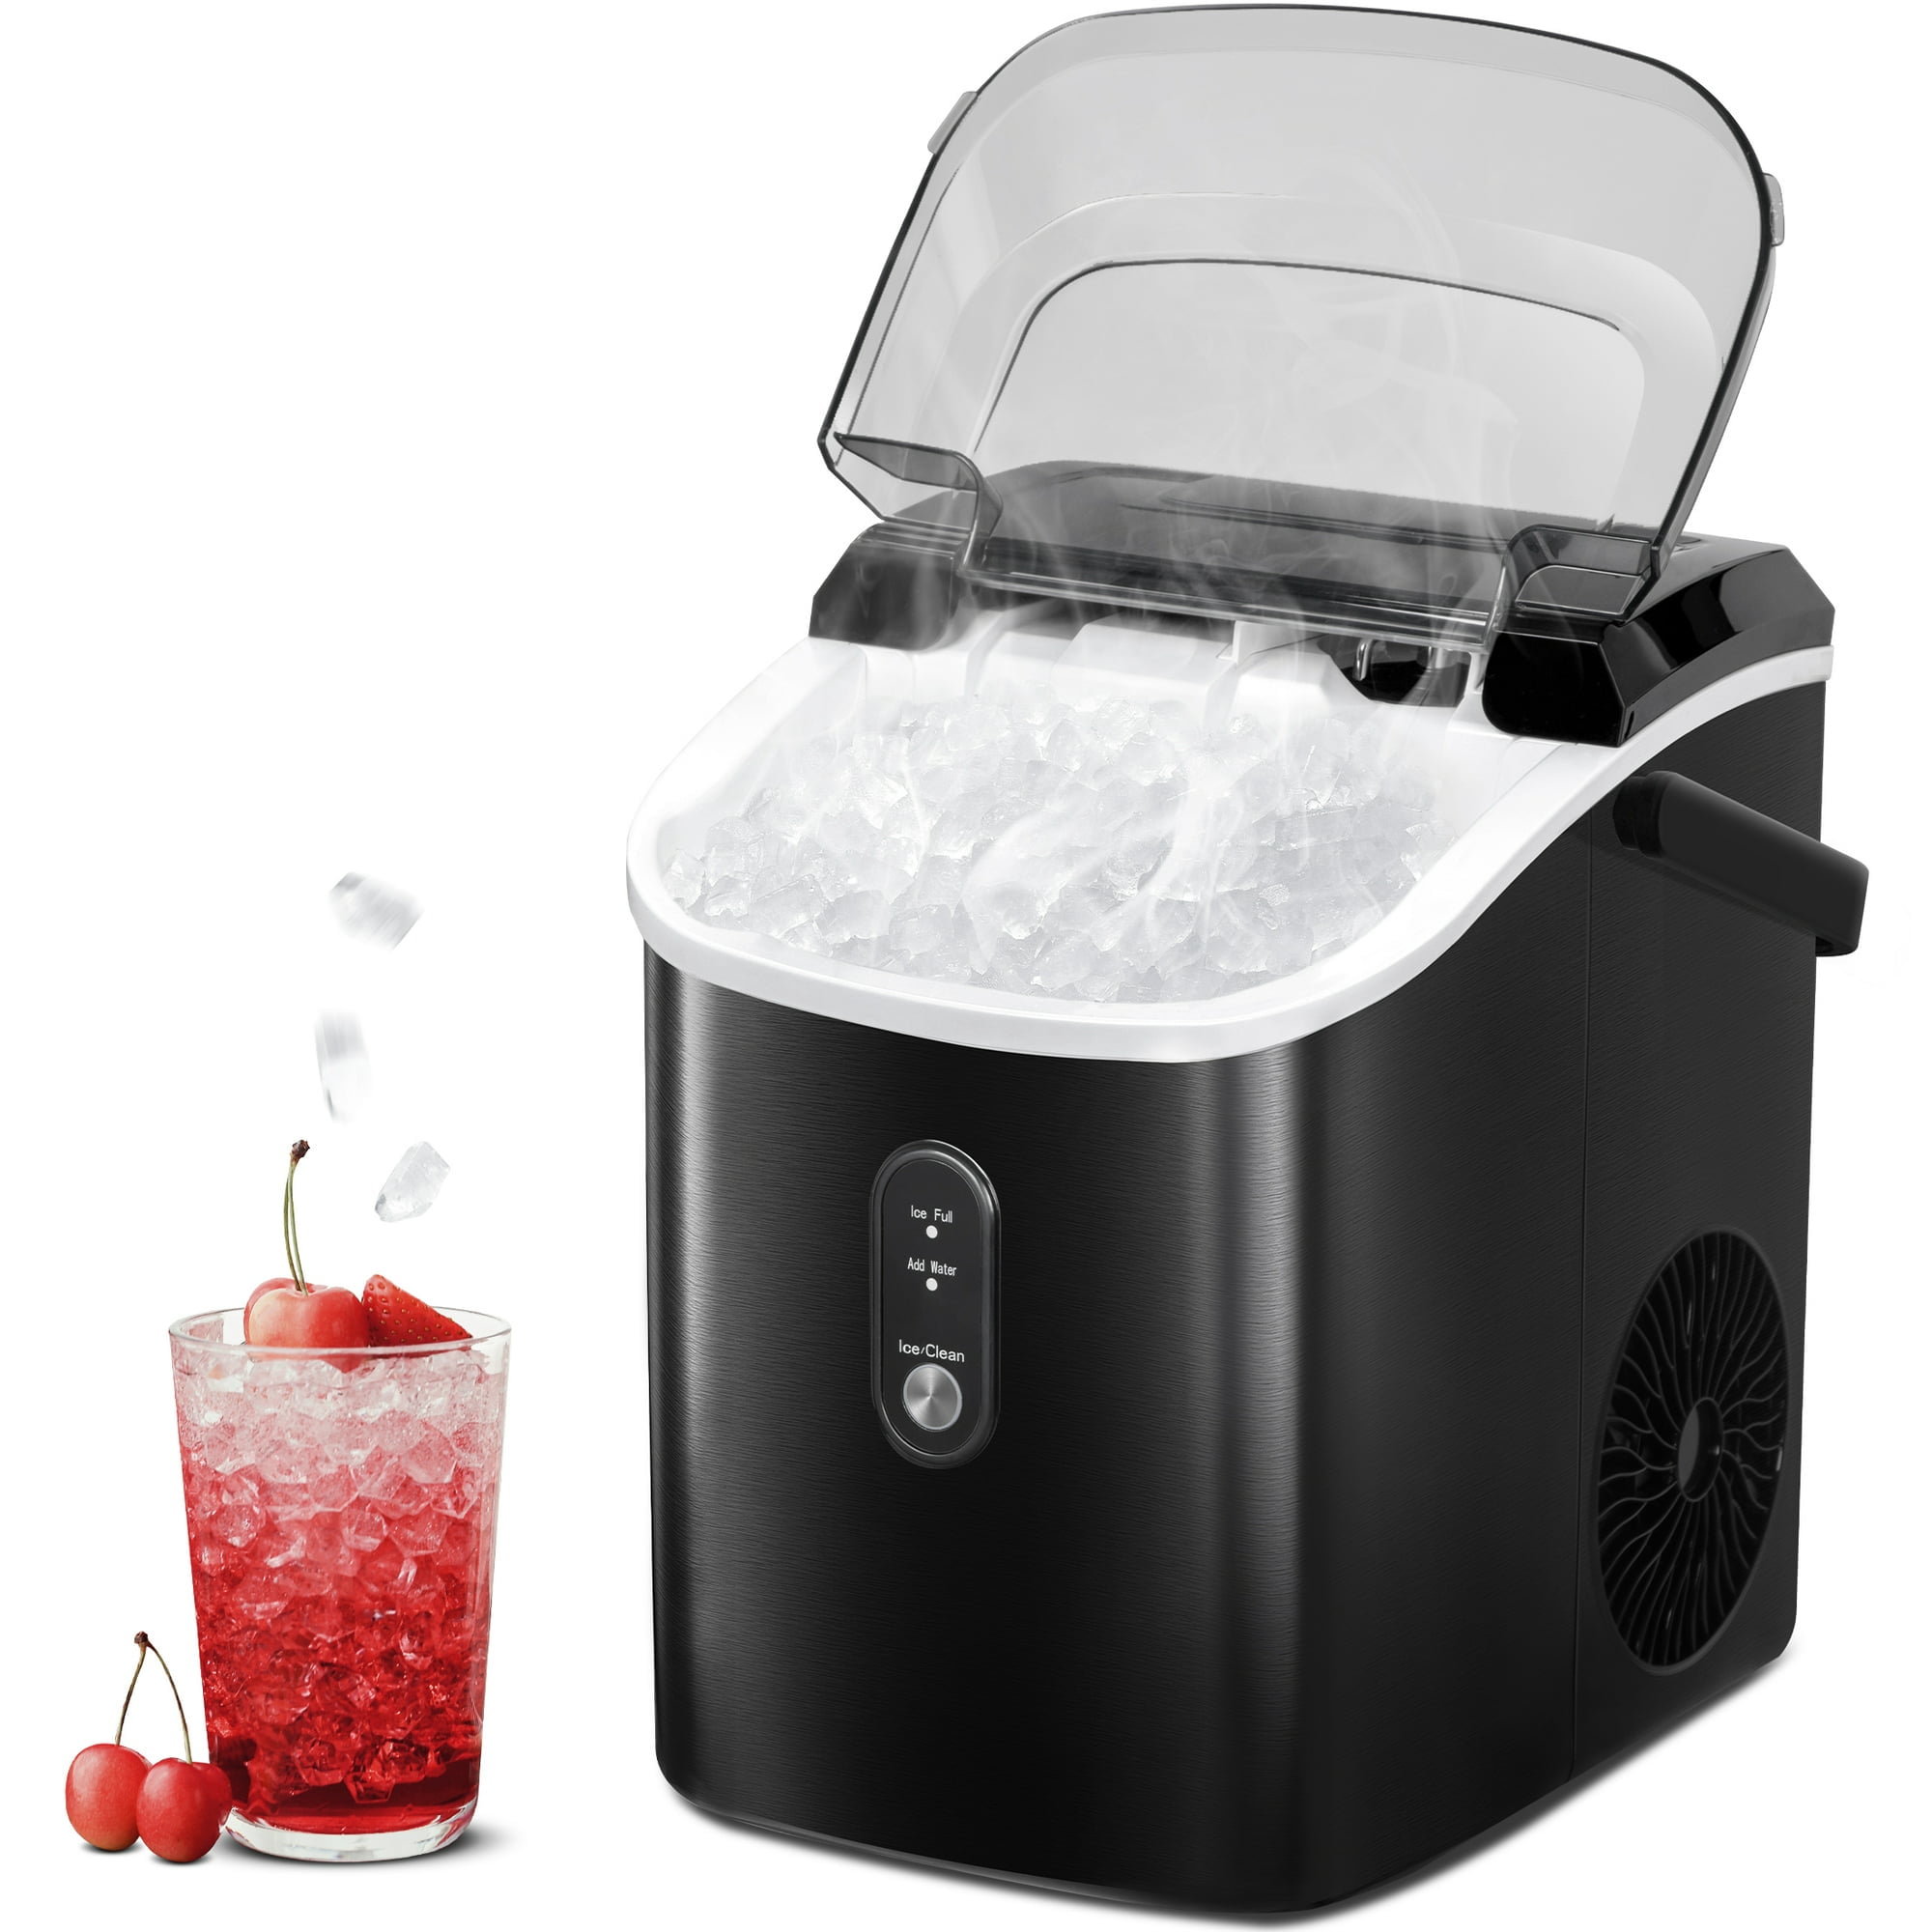 Nugget Ice Maker, Countertop Model for Sale in New Braunfels, TX